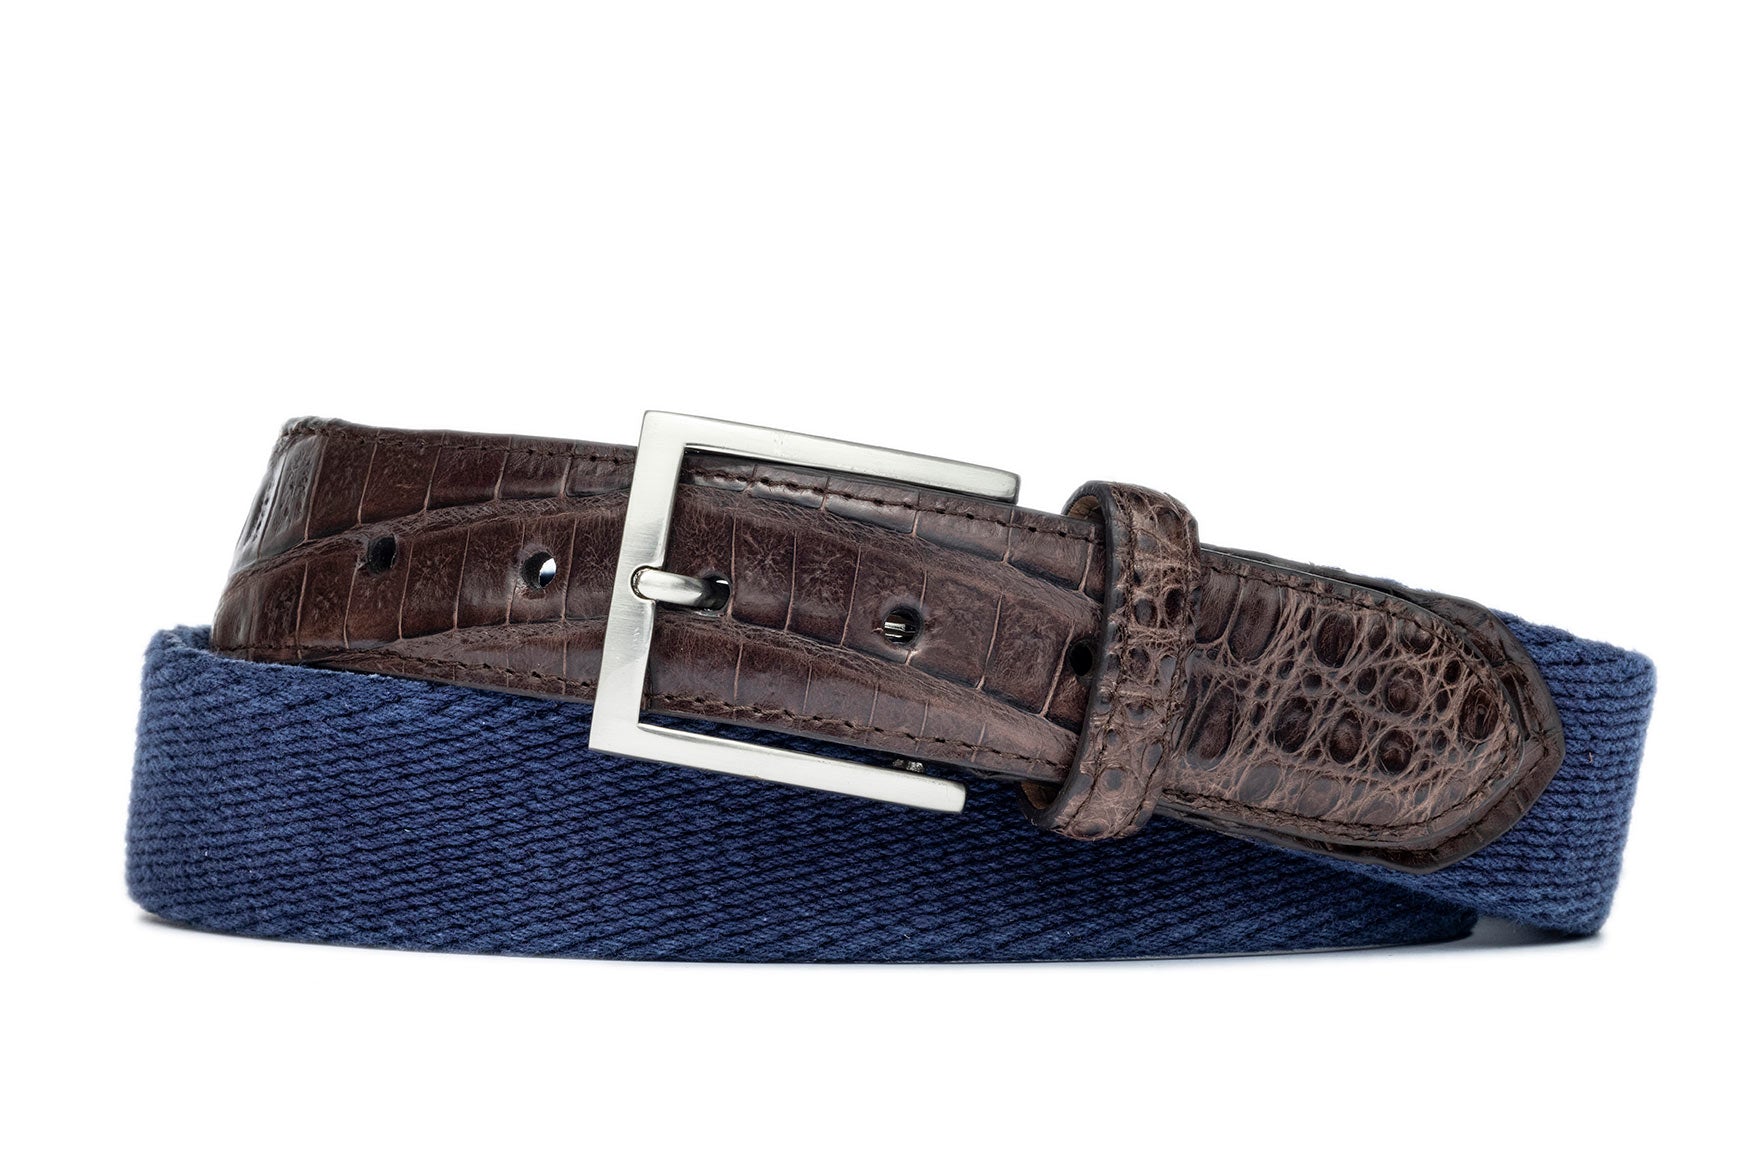 Cotton Weave Belt with Crocodile Tabs and Brushed Nickel Buckle